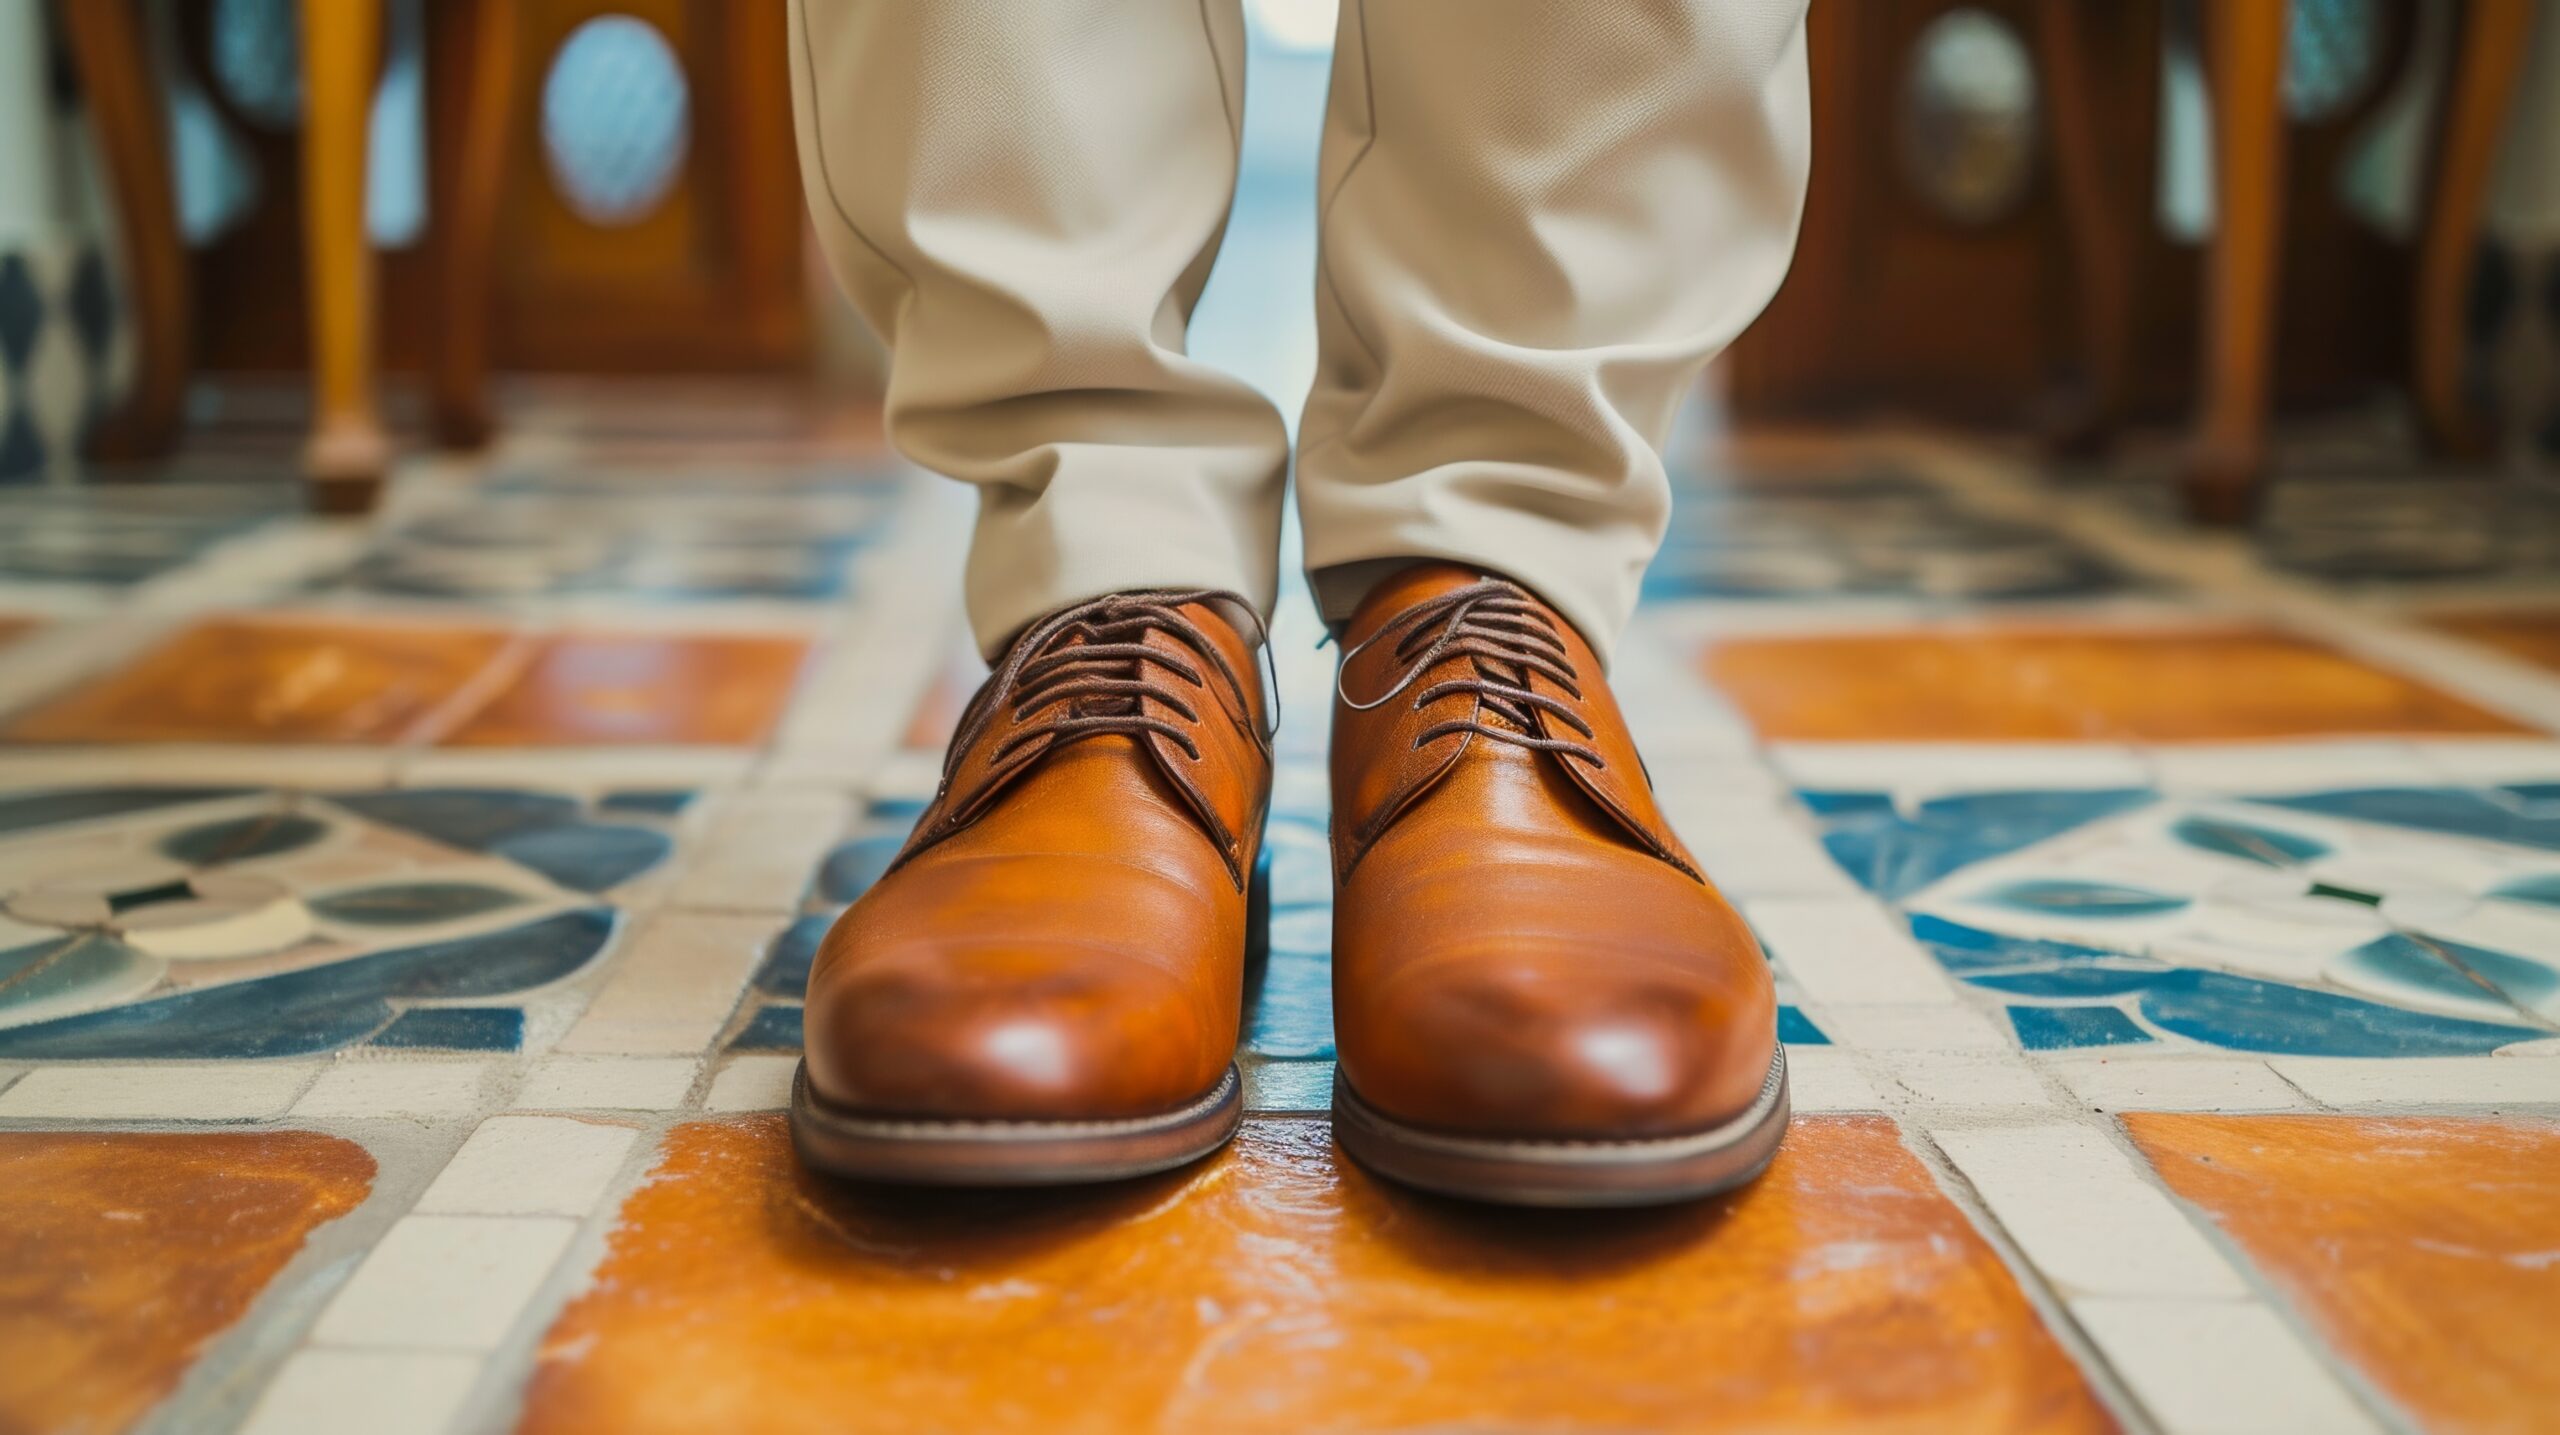 A person in Austin, TX, showcasing freshly shined brown leather shoes on a patterned tile floor.